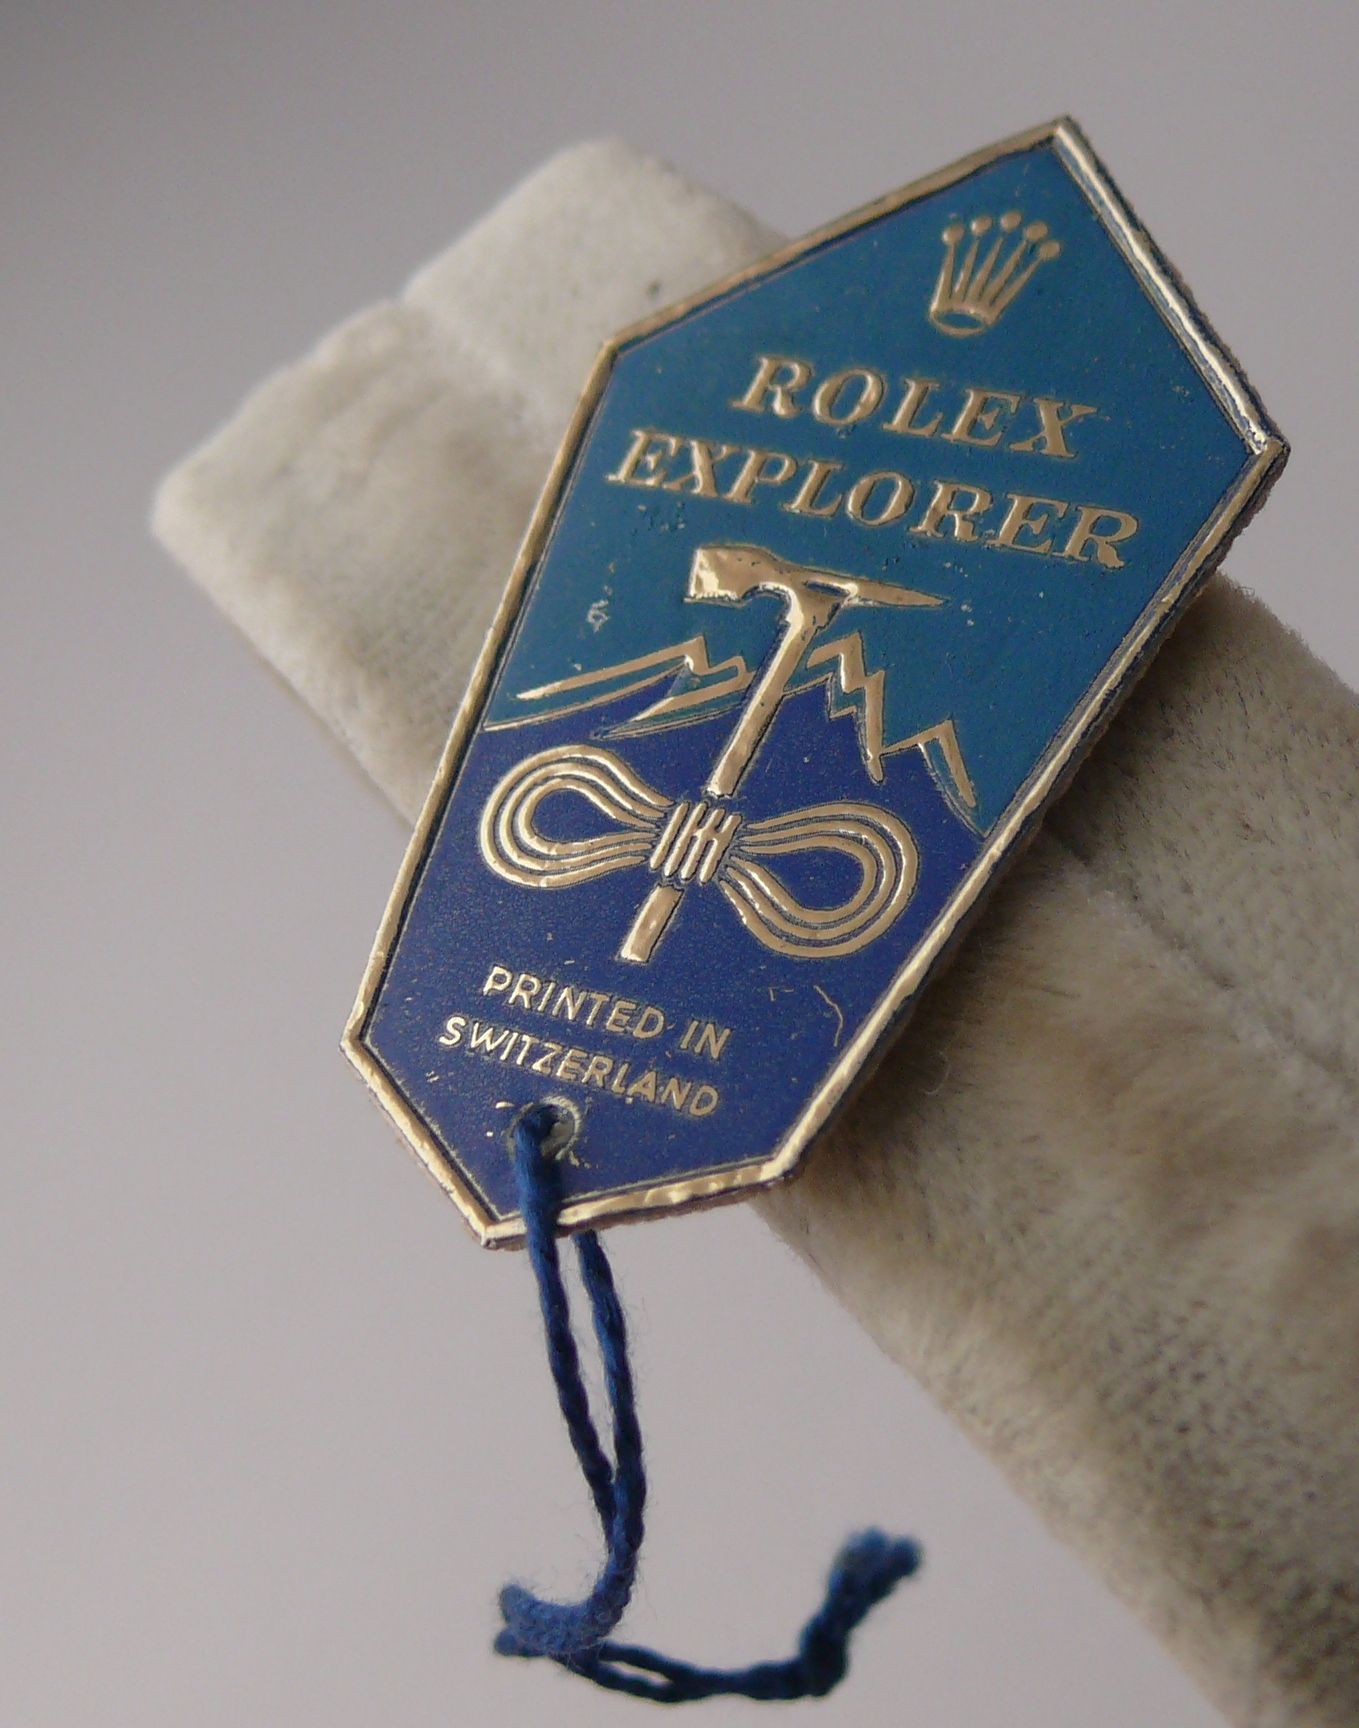 RARE Vintage Gents Rolex Explorer Swing Tags from the 1950s suitable for various early gilt models - Image 4 of 4